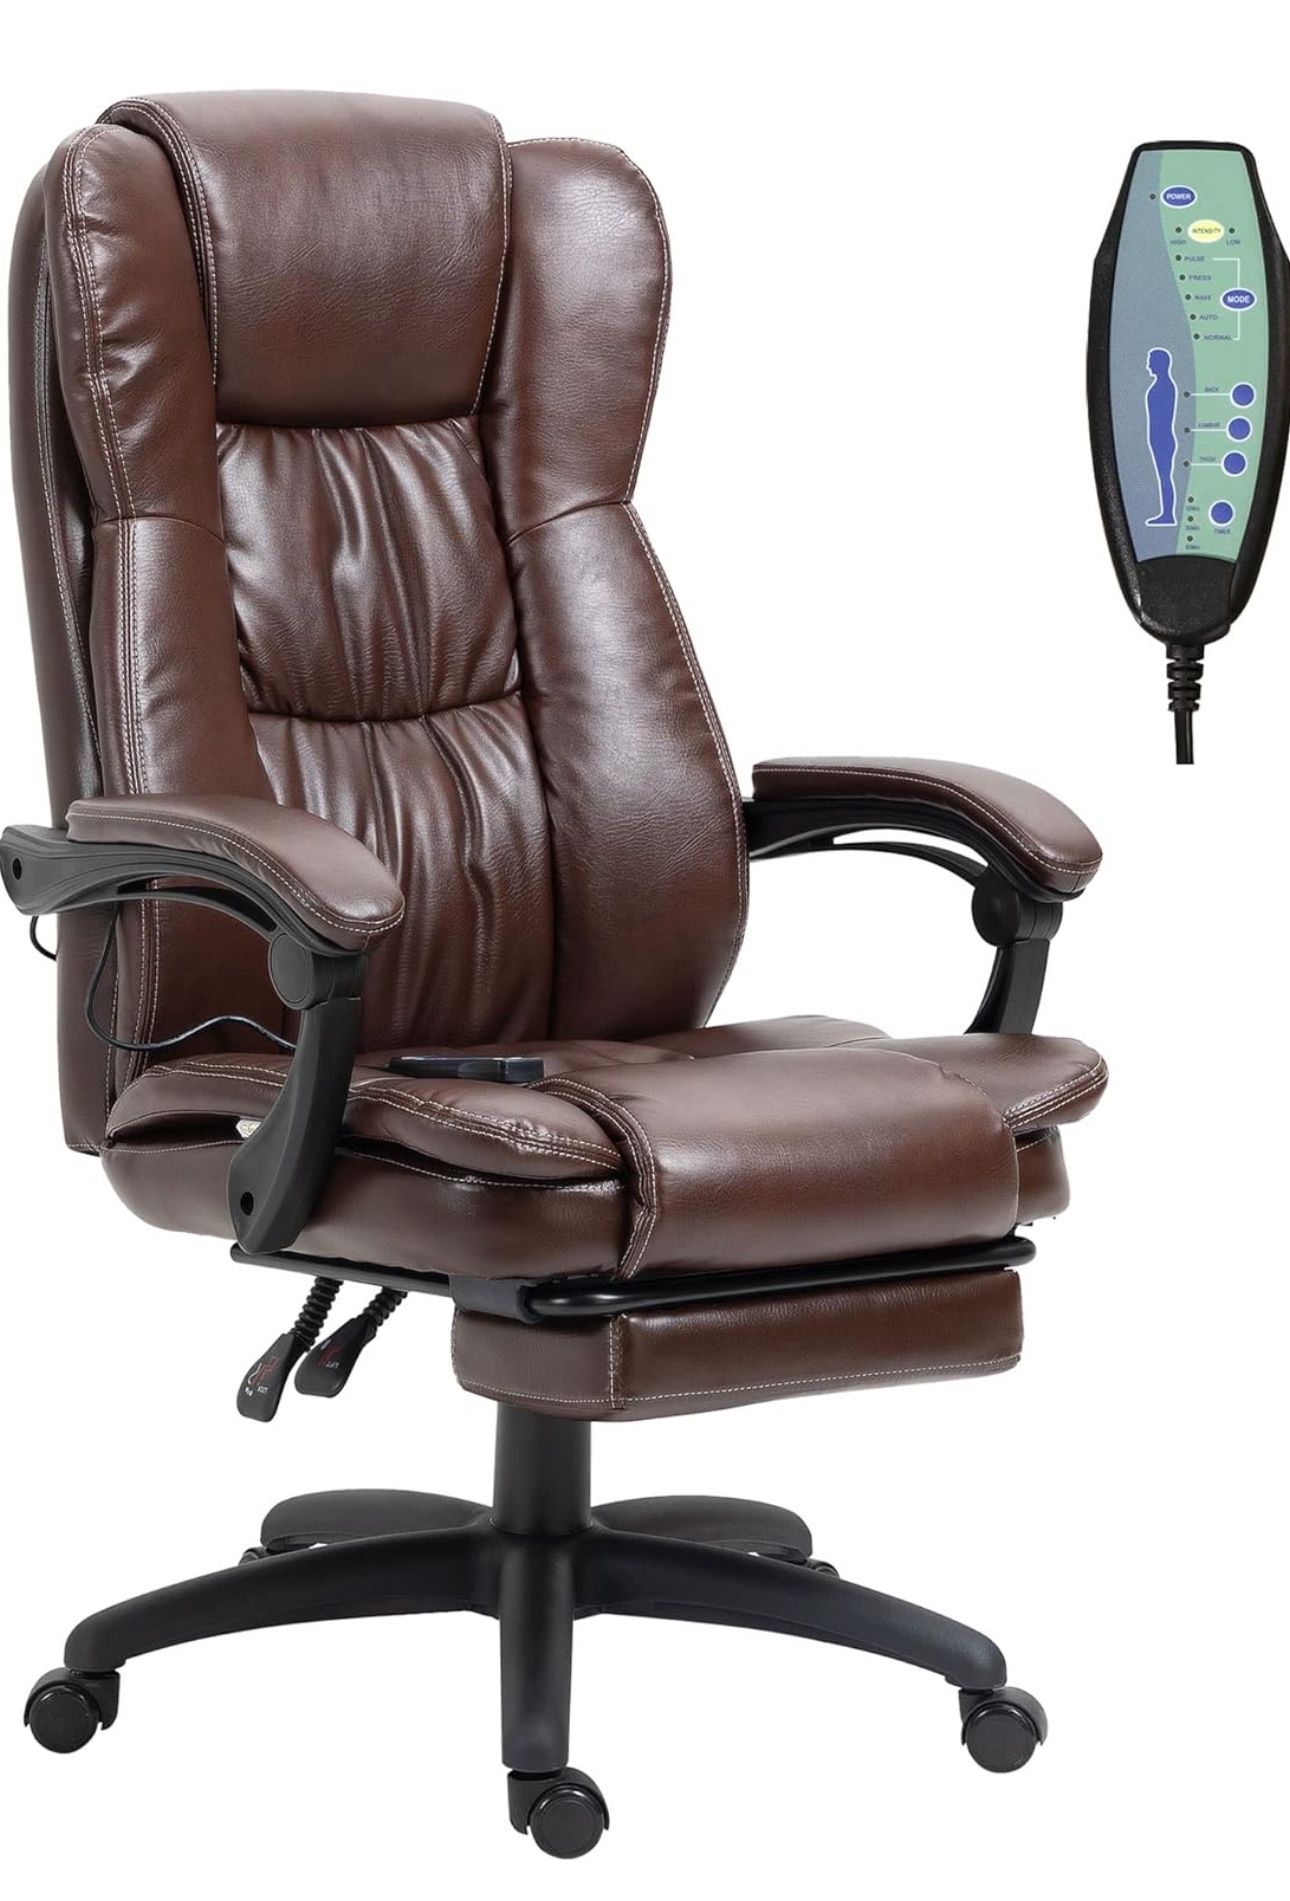 High Back Massage Office Chair with 6-Point Vibration, 5 Modes, Executive Chair, PU Leather Swivel Chair with Reclining Back, and Retractable Footrest